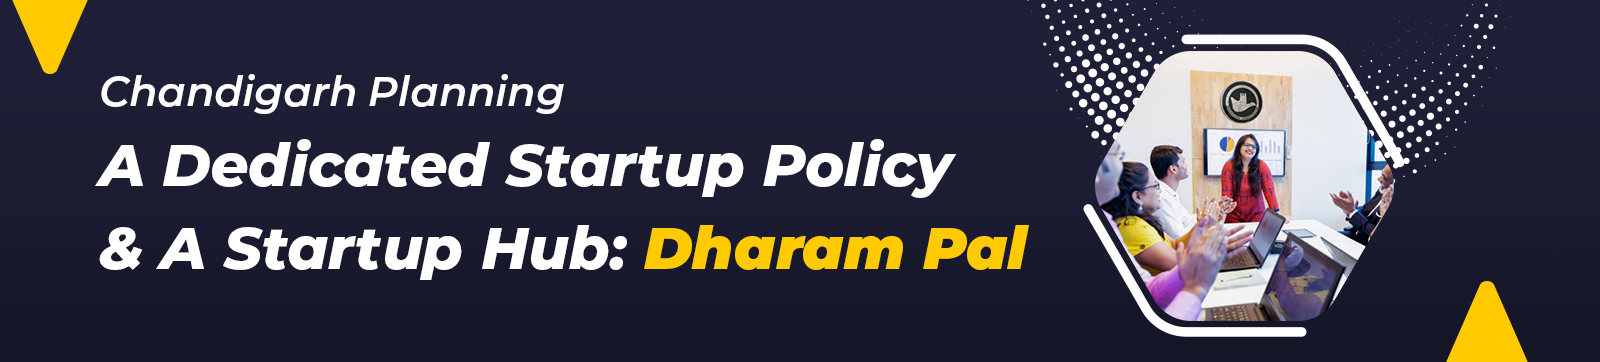 Chandigarh Planning A Dedicated Startup Policy & A Startup Hub: Dharam Pal